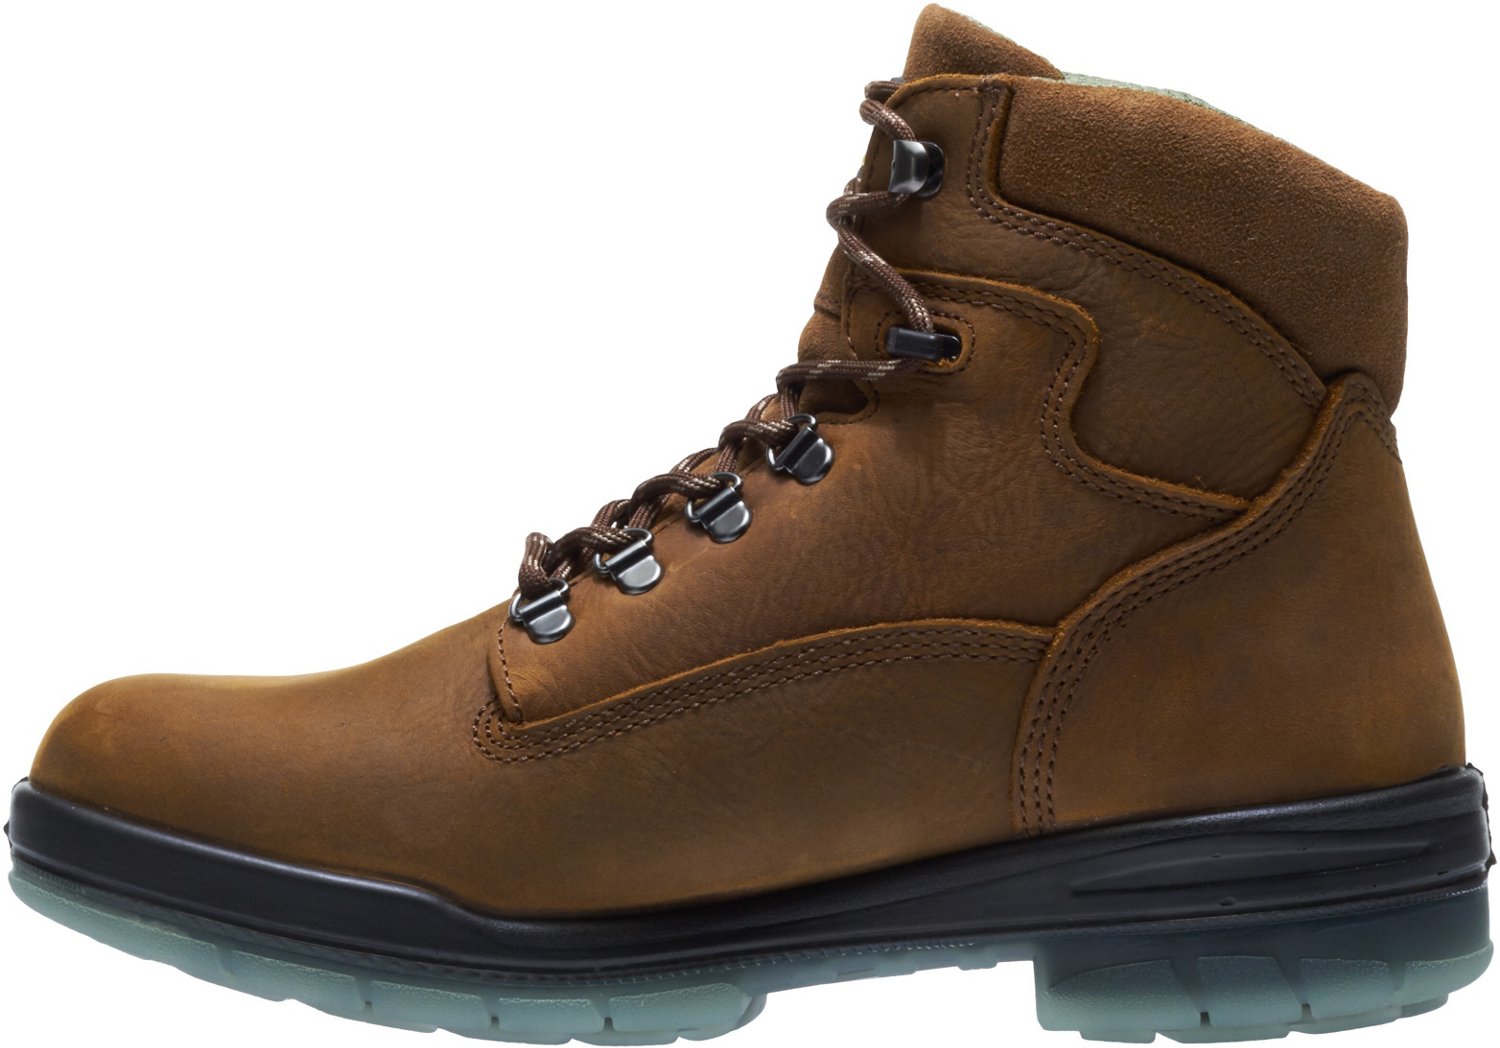 Wolverine Men's DuraShock Insulated EH Lace Up Work Boots | Academy